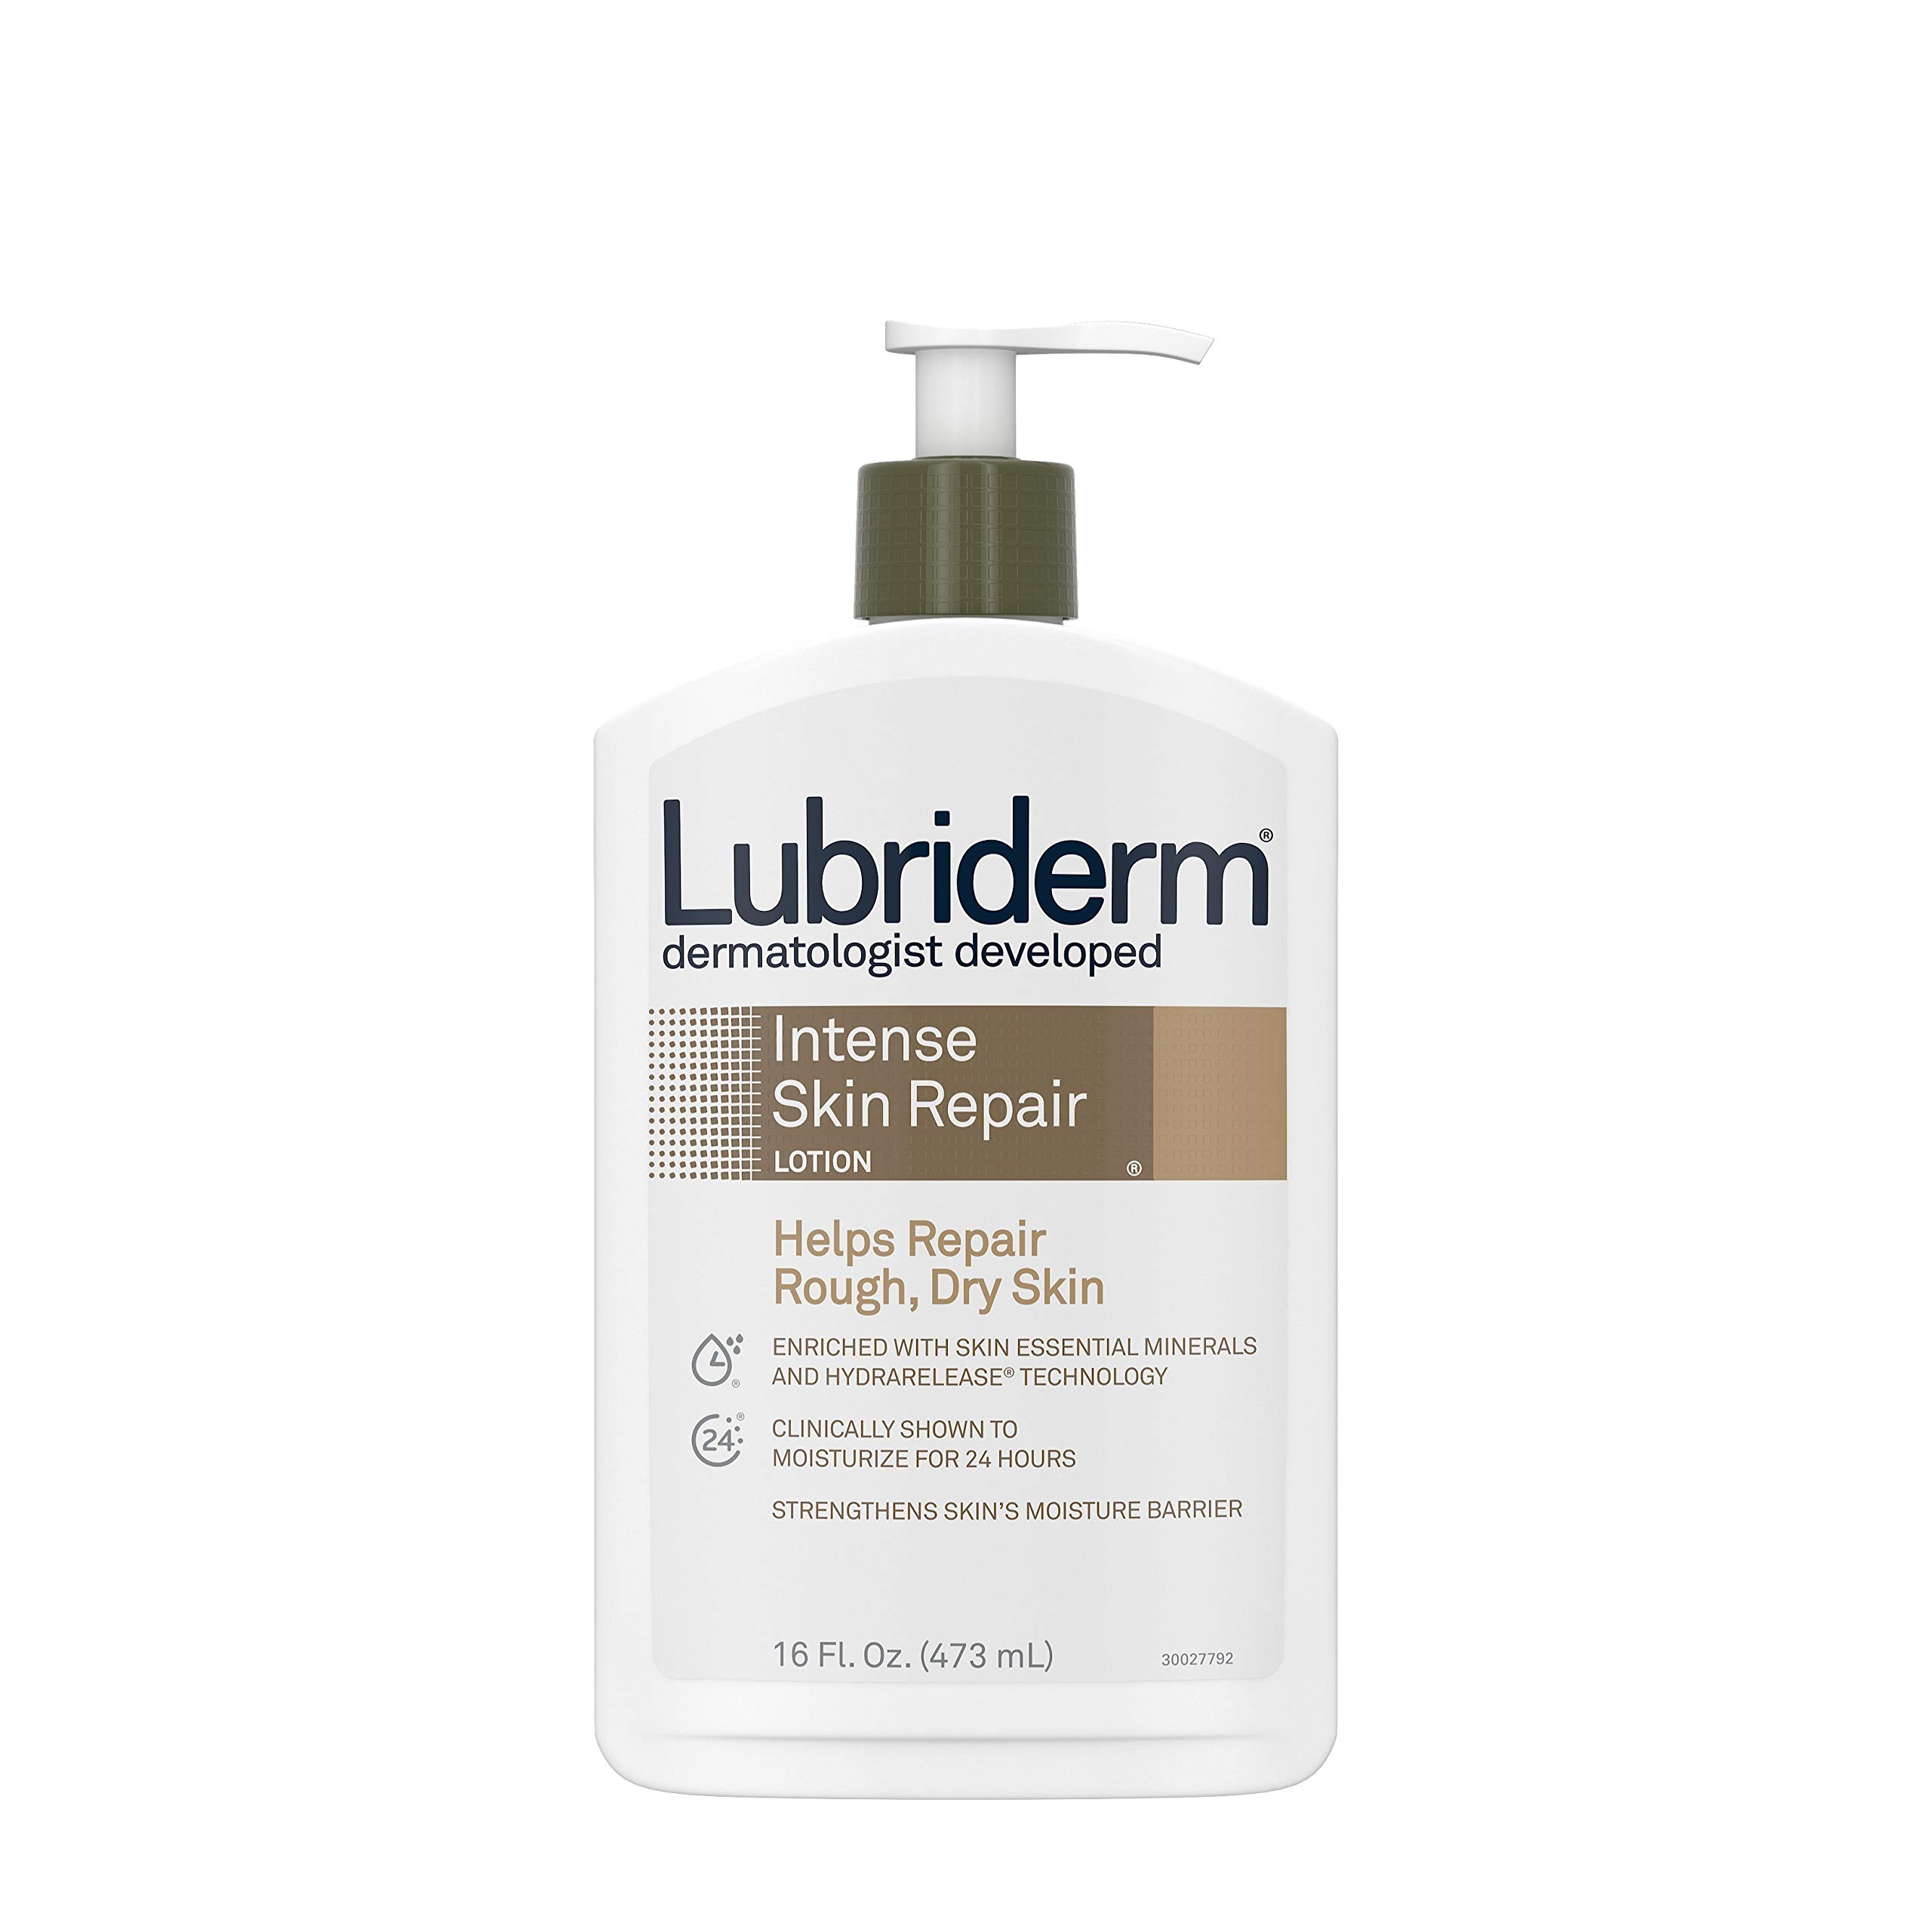 6-Pack 16-Oz Lubriderm Intense Dry Skin Repair Lotion $28.43 + $10 Amazon Beauty credit w/ S&S + Free Shipping